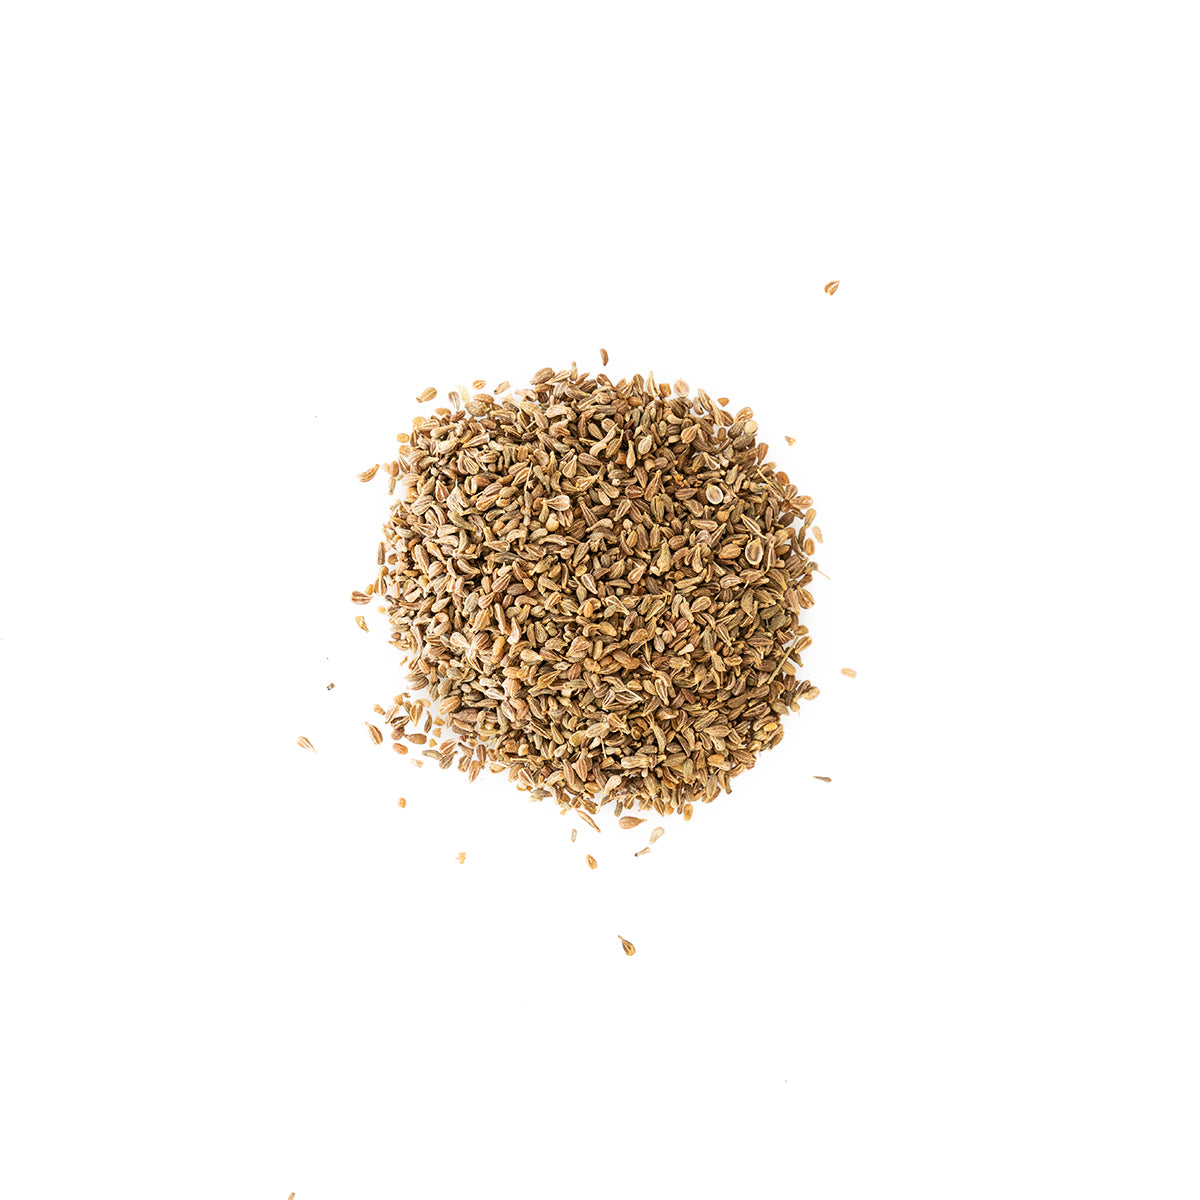 Primary Image of Anise Seed (Pimpinella anisum)